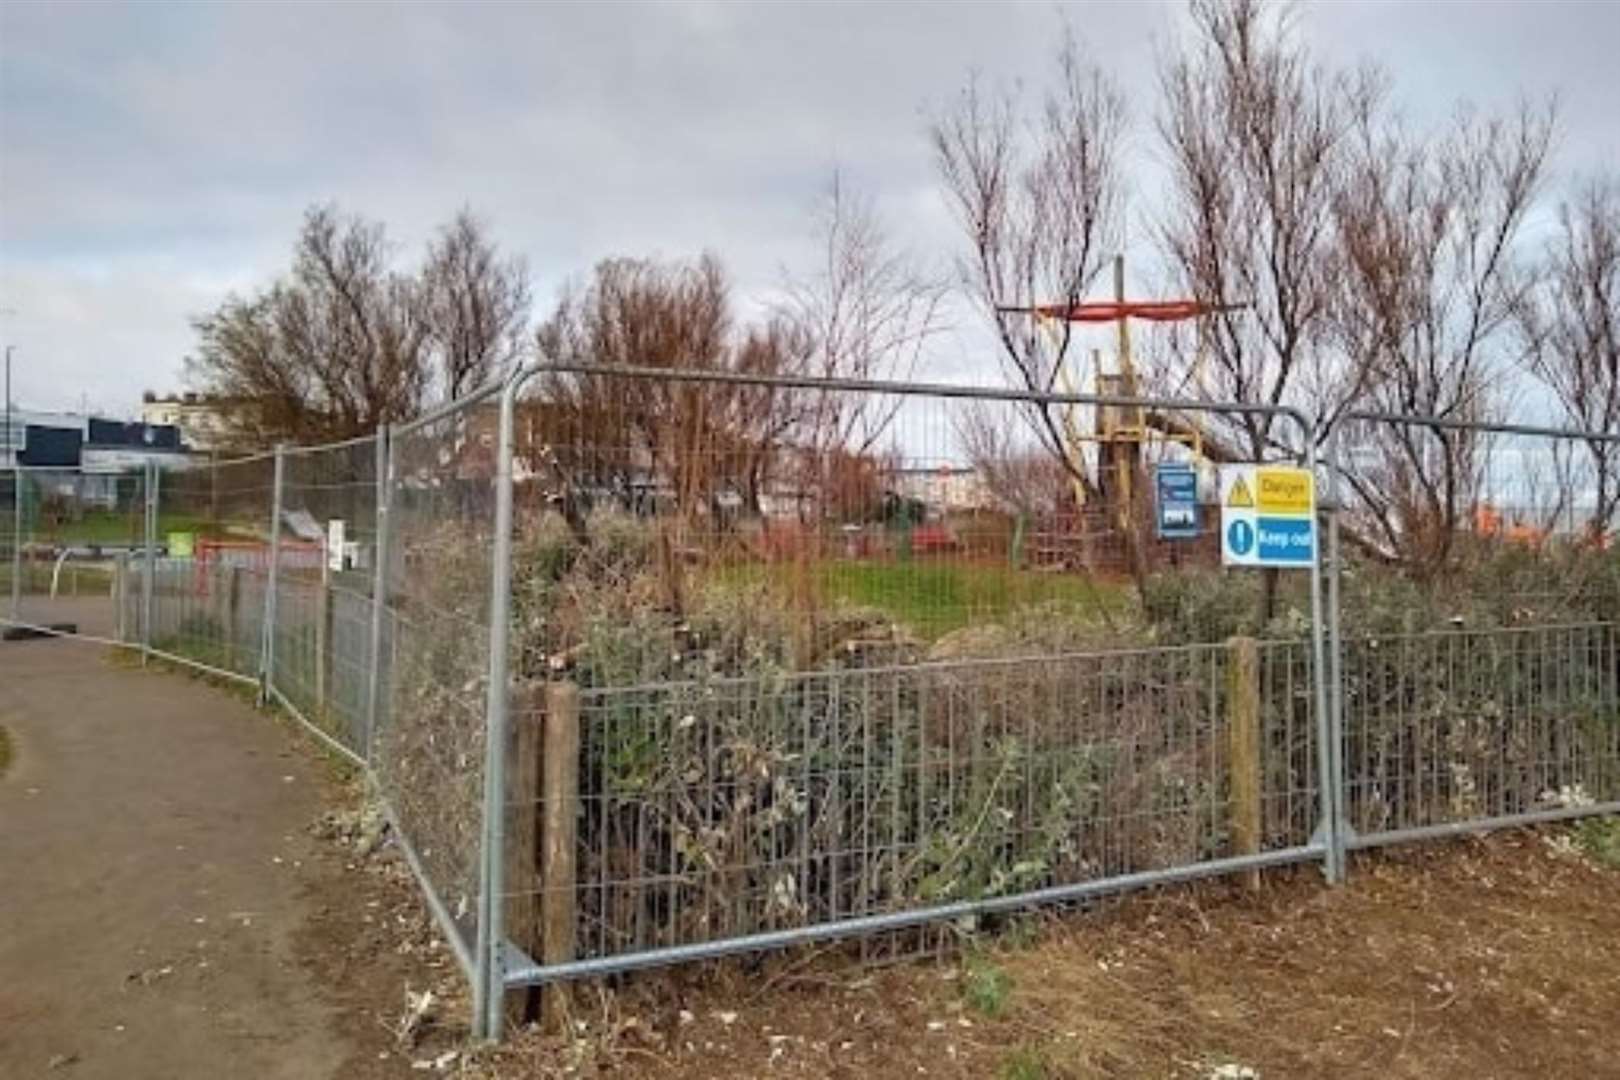 The Viking ship playground in Cliftonville has been fenced off. Picture: Thanet District Council